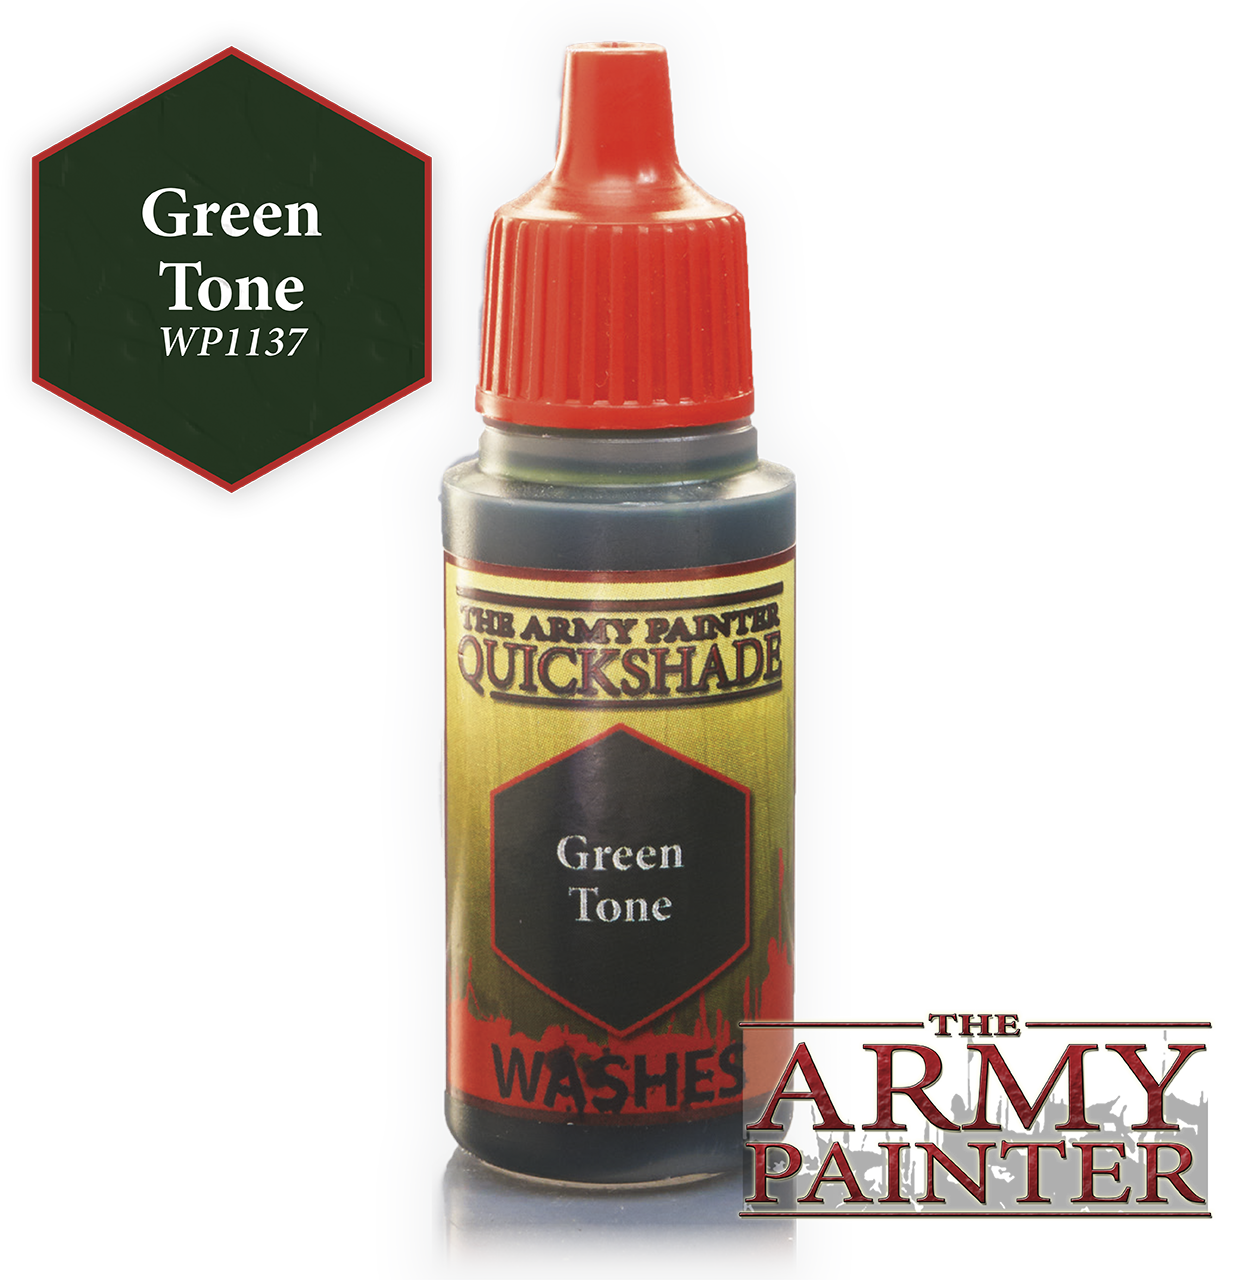 The ARMY PAINTER: Washes Warpaints - Green Tone | Tacoma Games